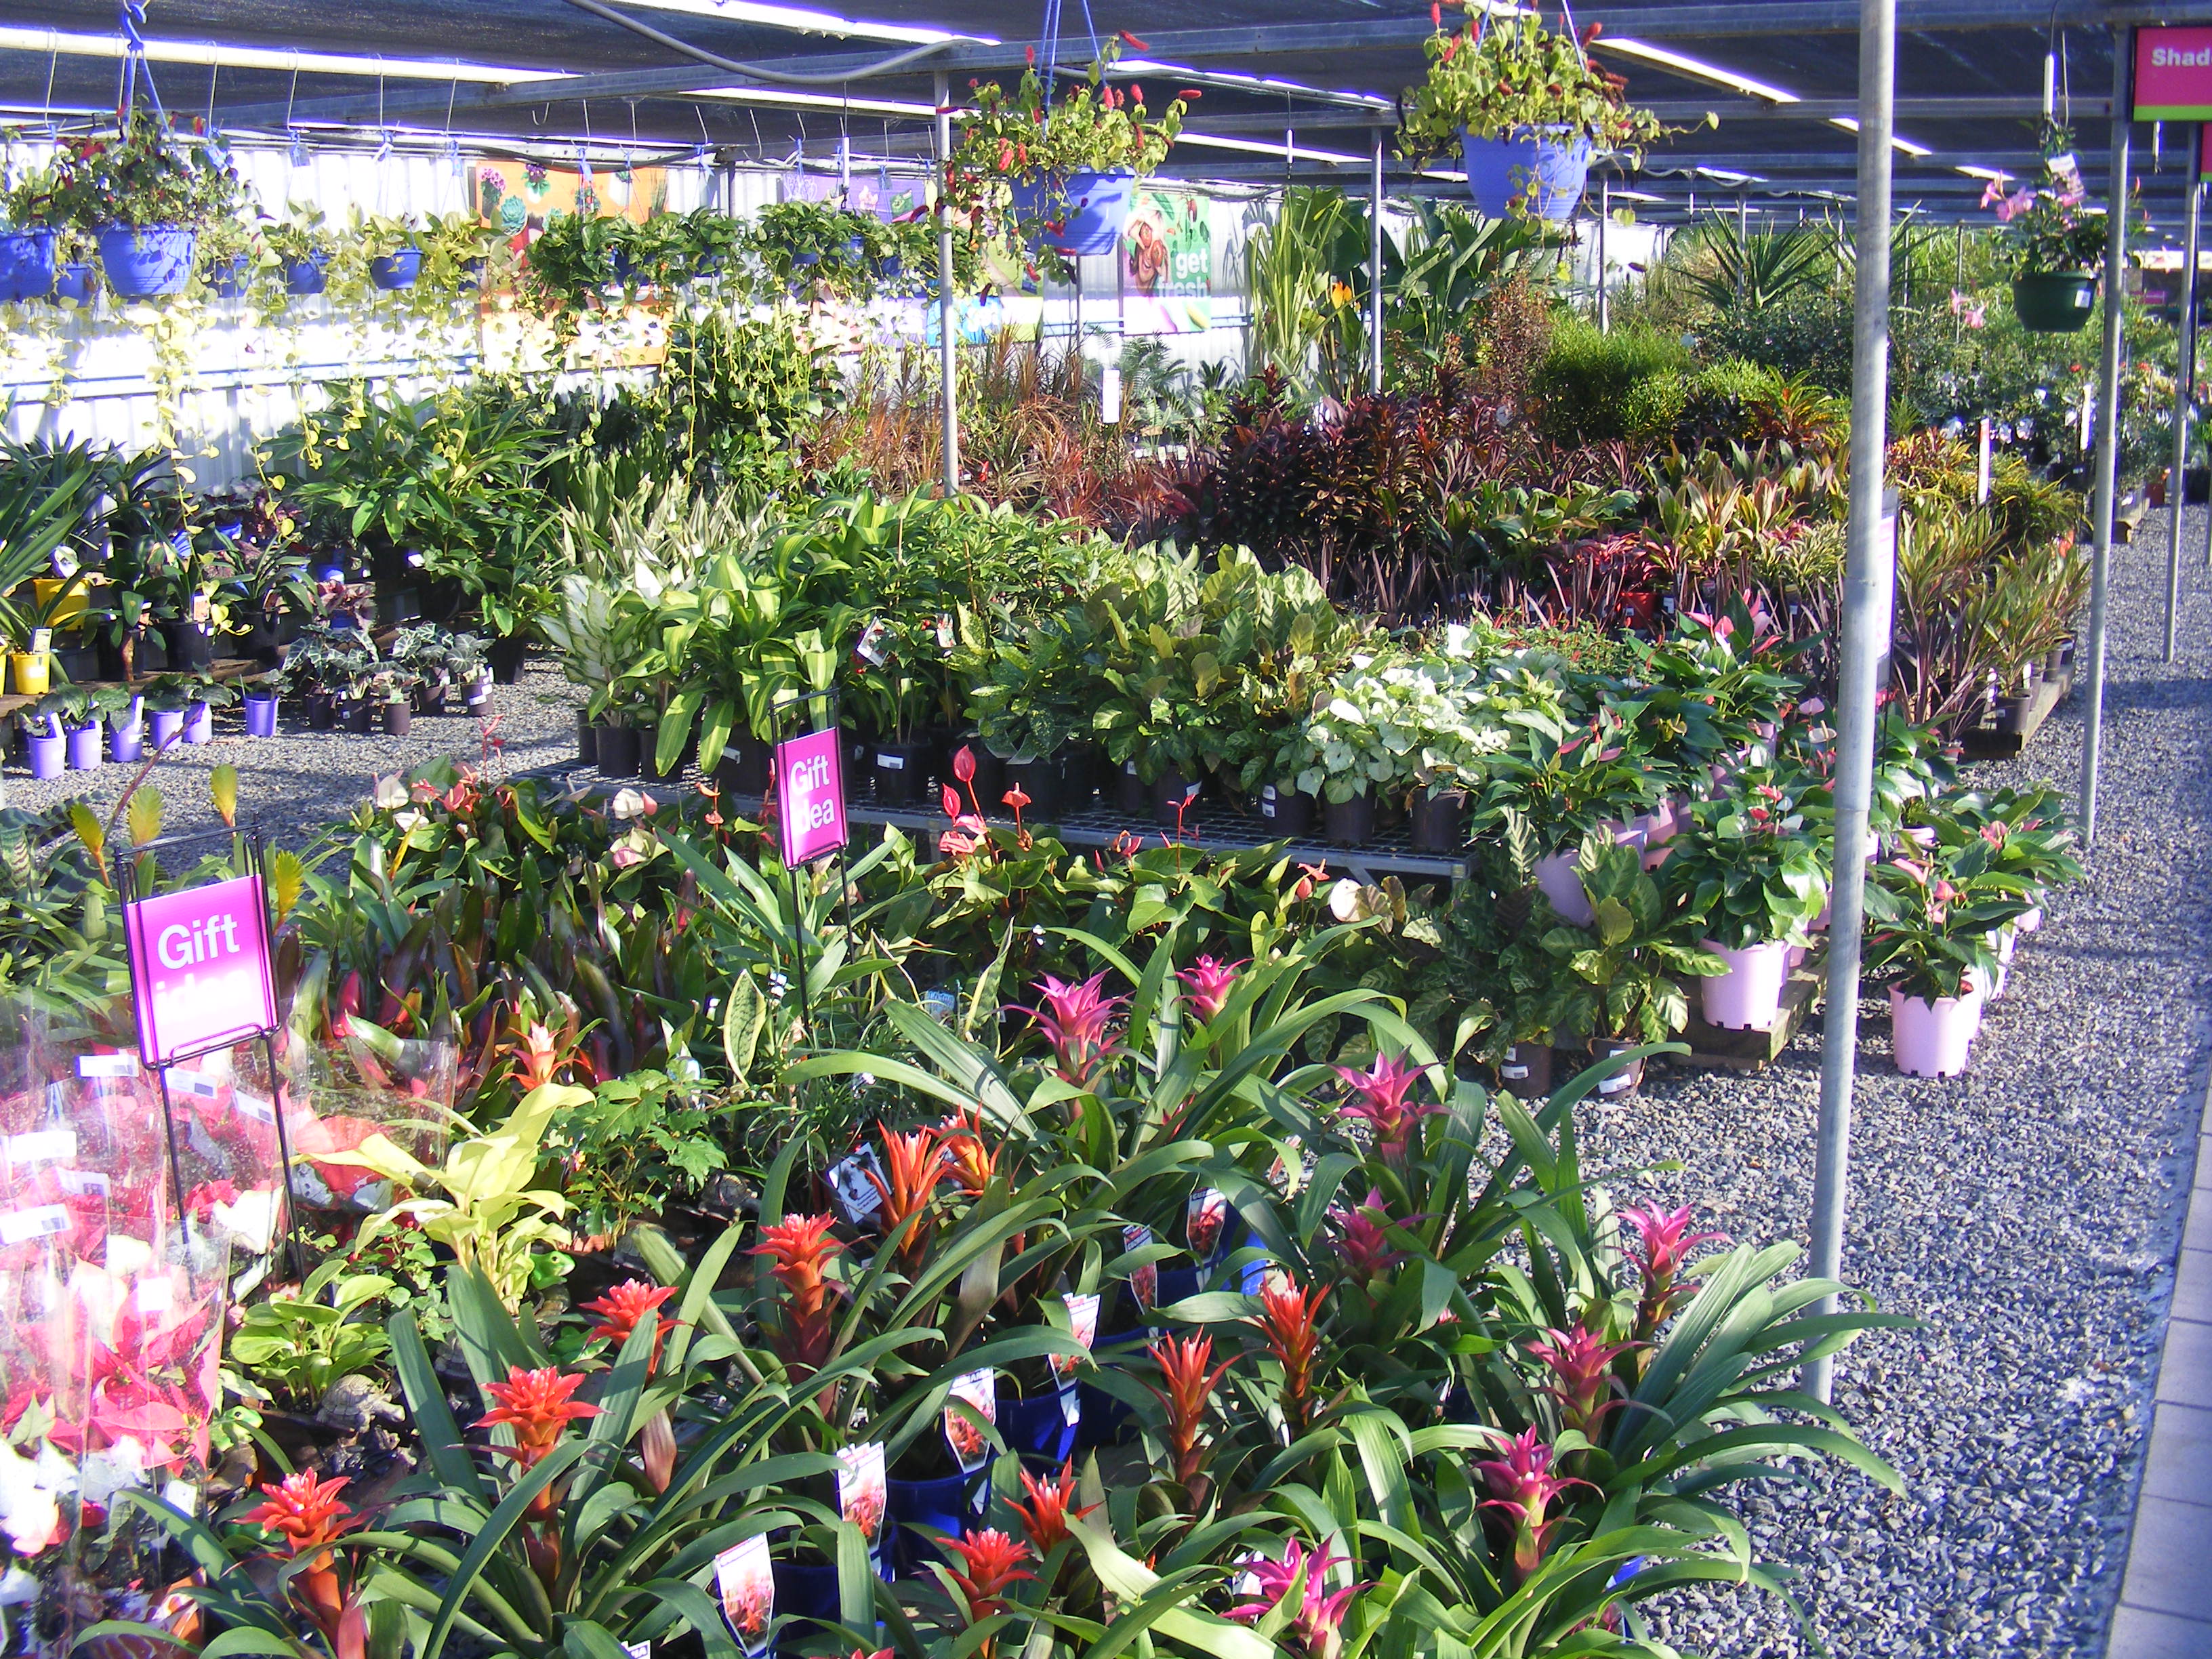 Tanby Garden Centre Plants Turf Landscaping Giftware